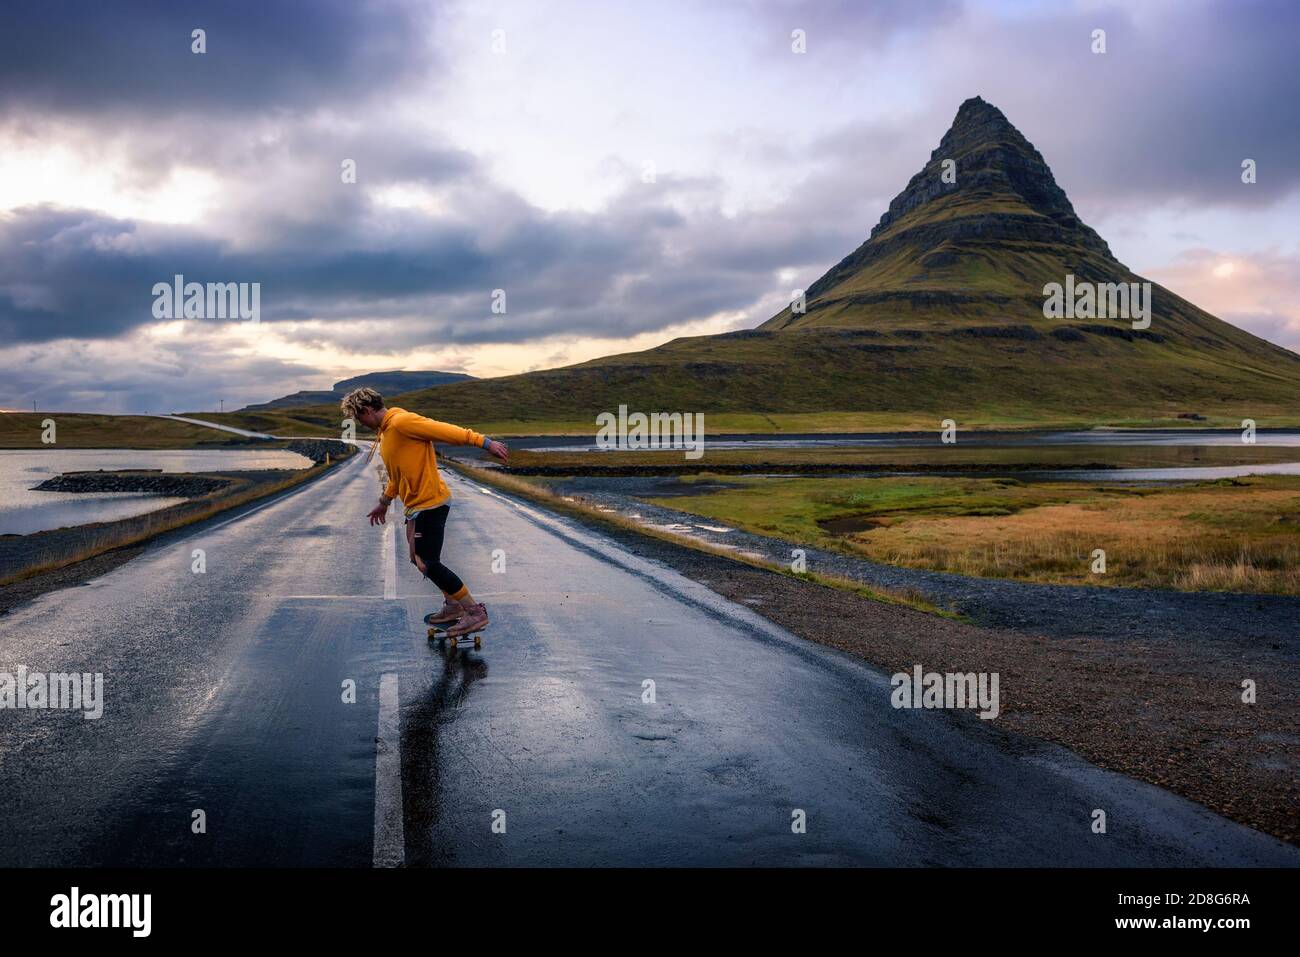 Action shot of a skater on a wet road around mount Kirkjufell in Iceland Stock Photo